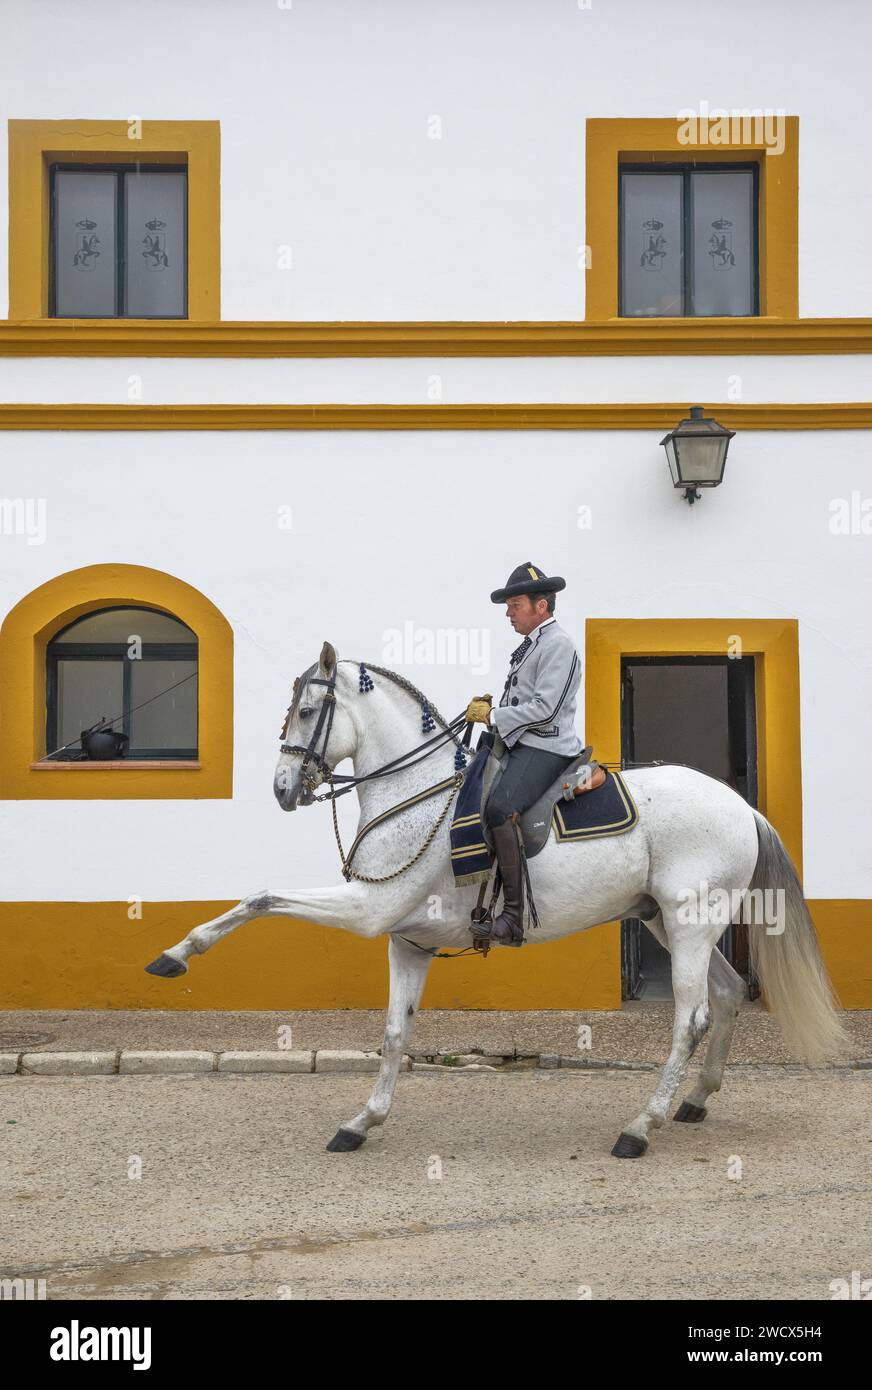 Spain, Andalusia, Jerez de la Frontera, royal Andalusian school of equestrian art, rider in Goyesque costume on a white horse performing a dressage exercise in the stables Stock Photo